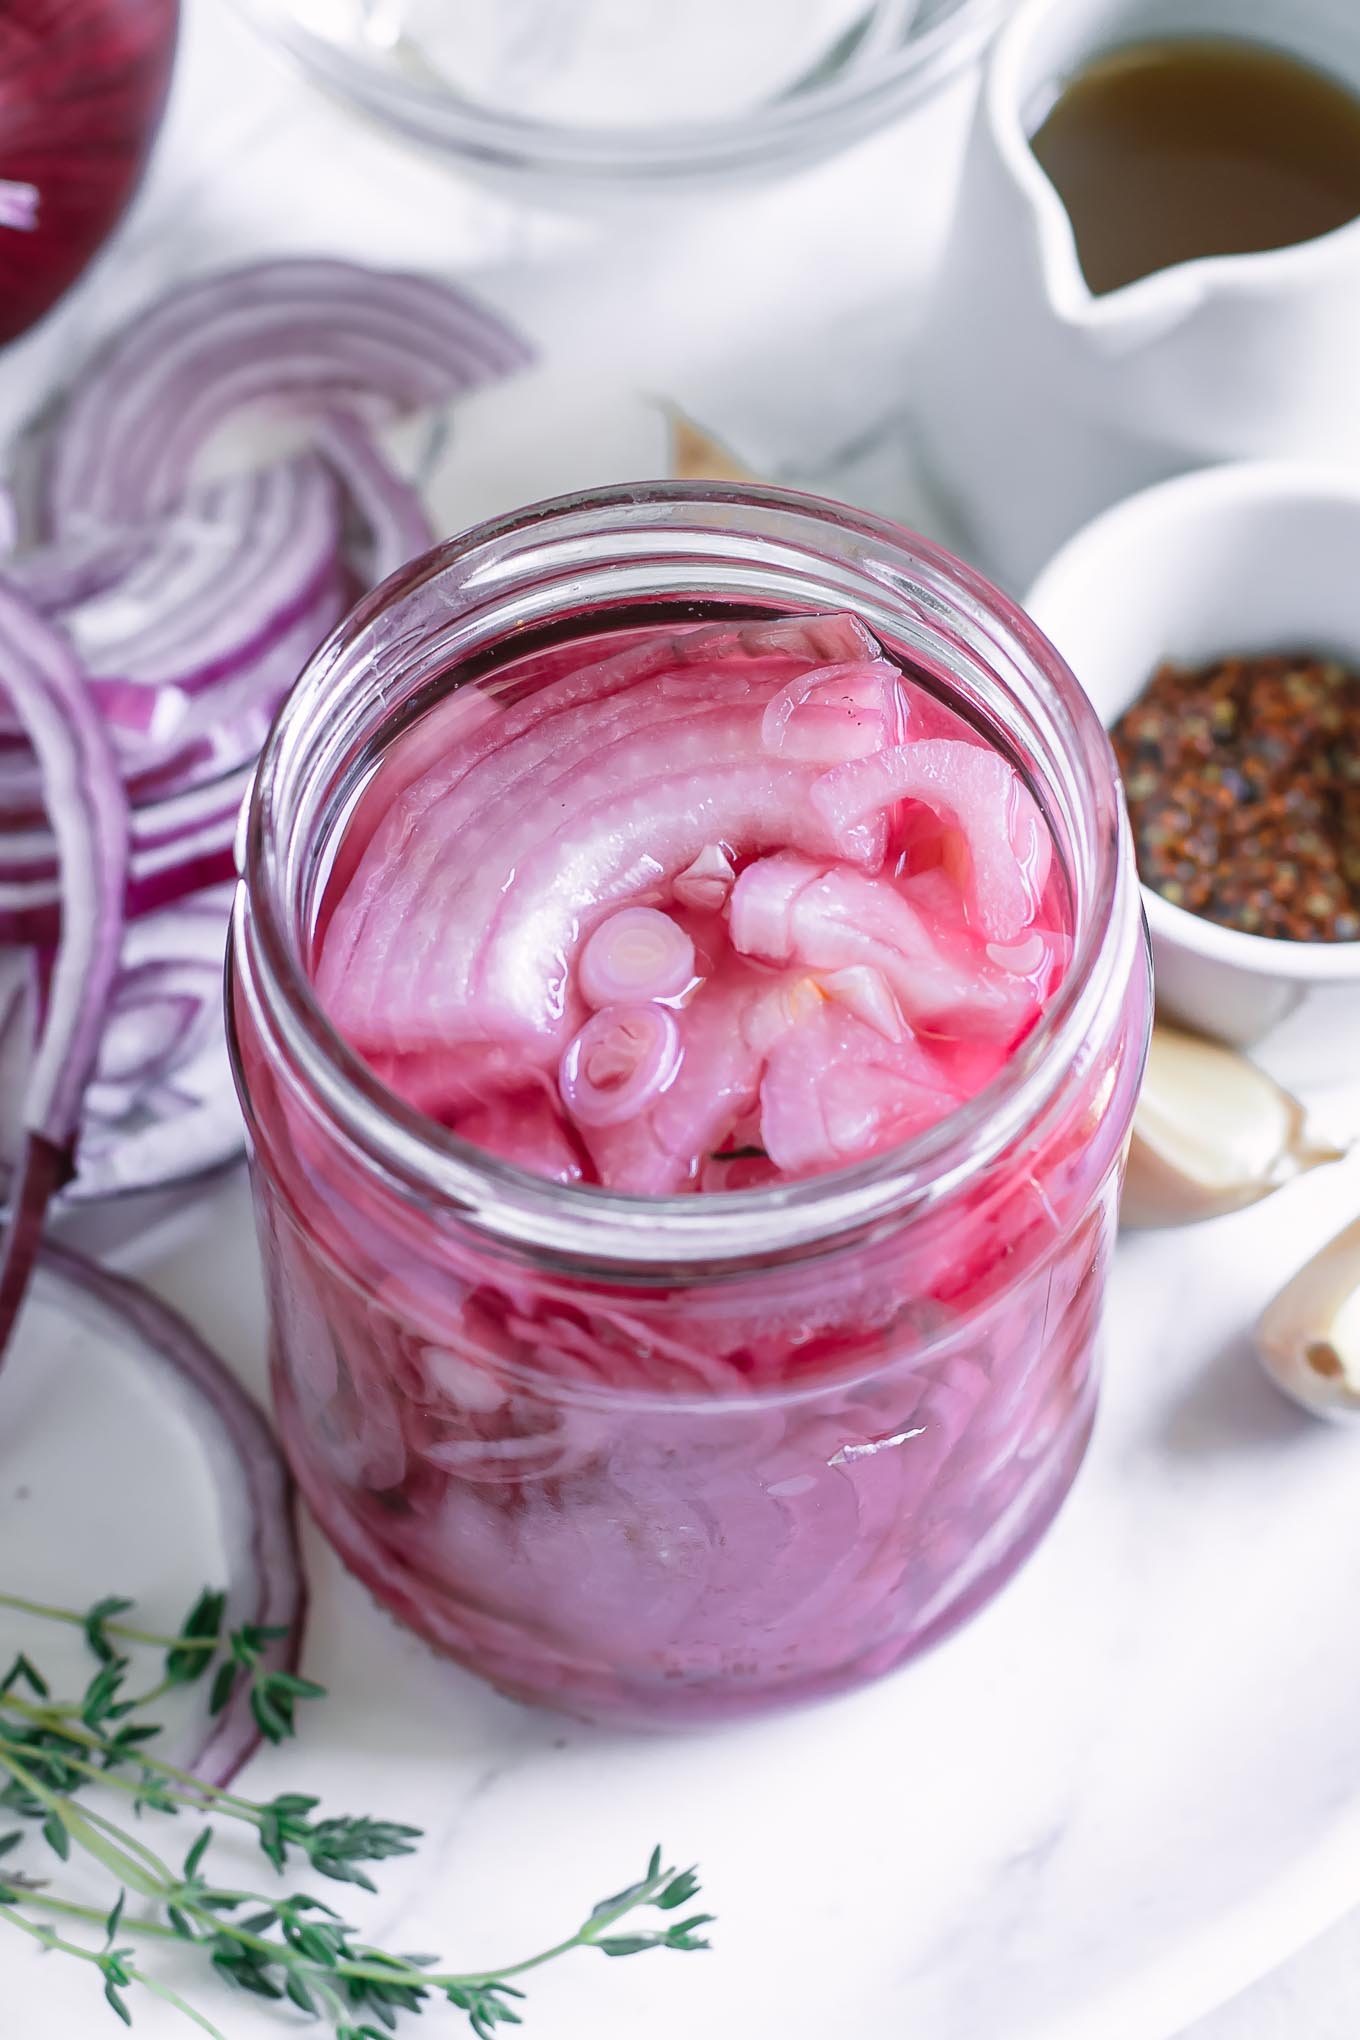 side view of a jar of pickled red onions on a plate with onions, herbs and spices